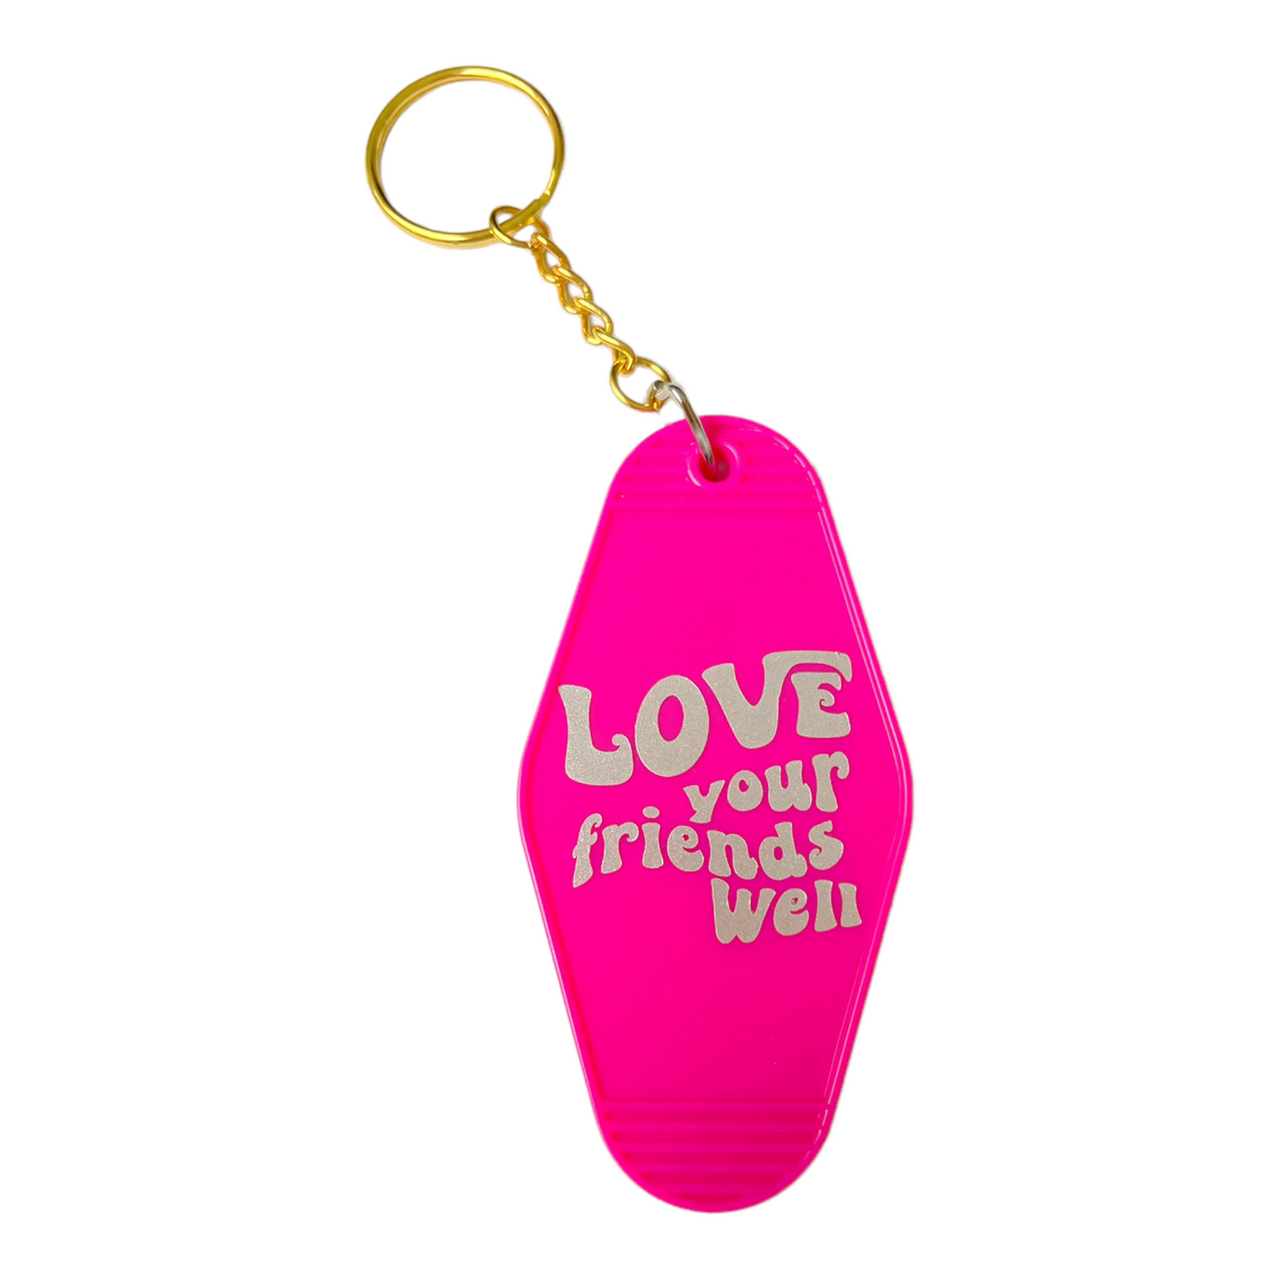 LOVE your friends well Motel Keychain